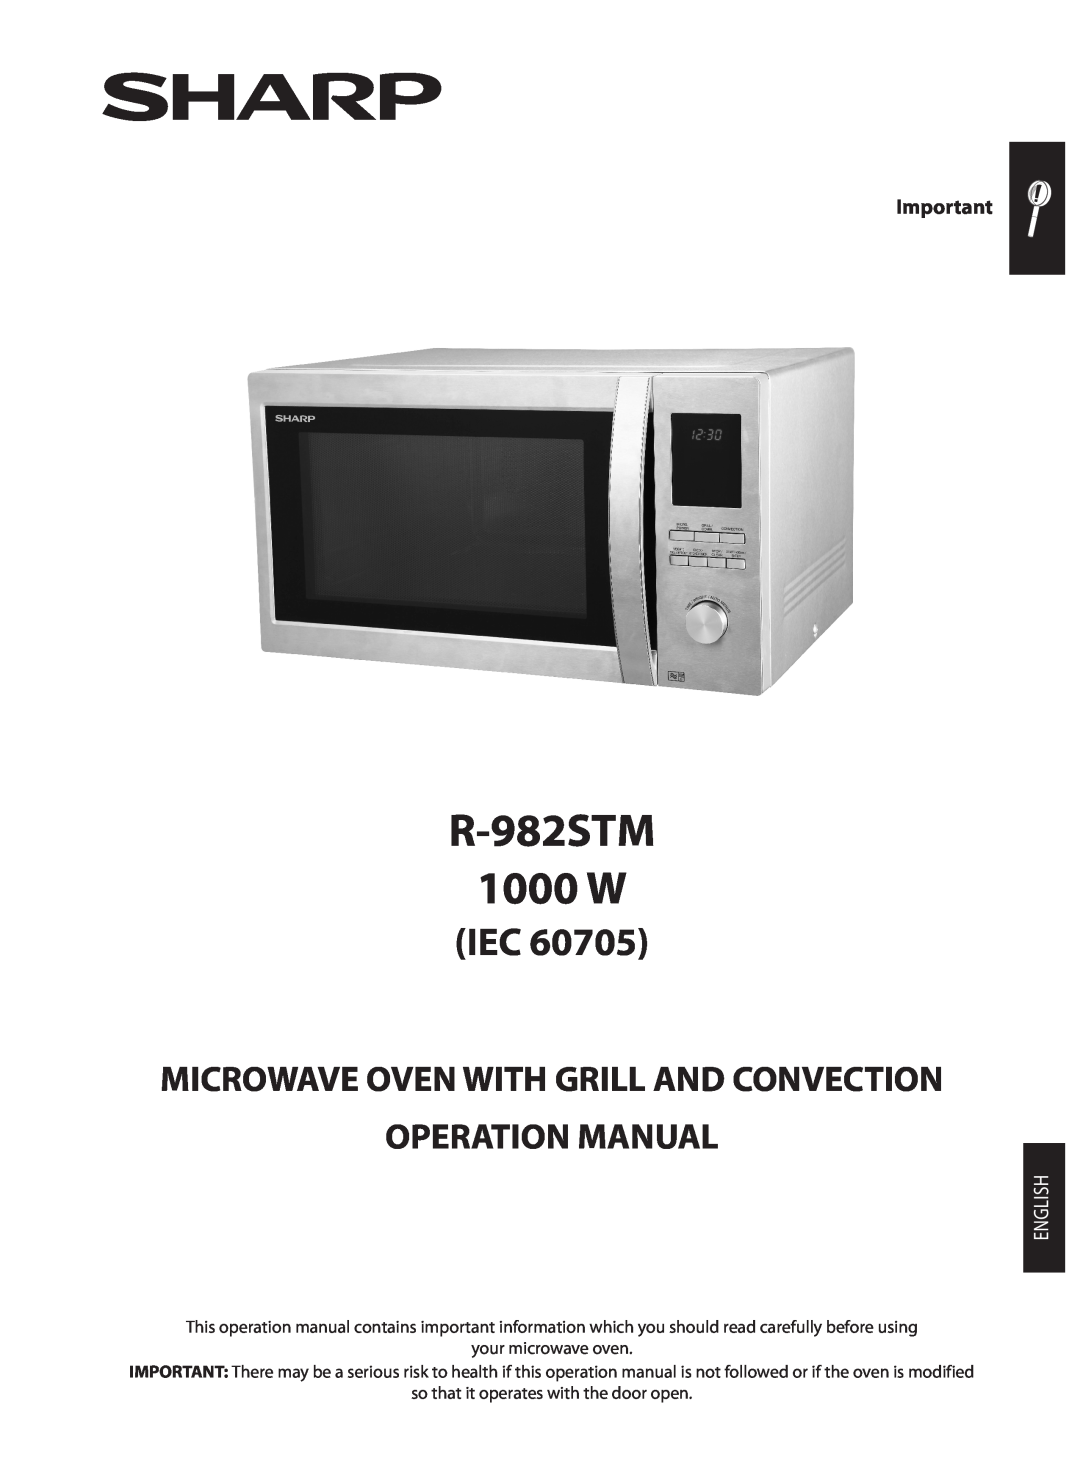 Sharp operation manual R-982STM 1000 W, Microwave Oven With Grill And Convection, English, your microwave oven 